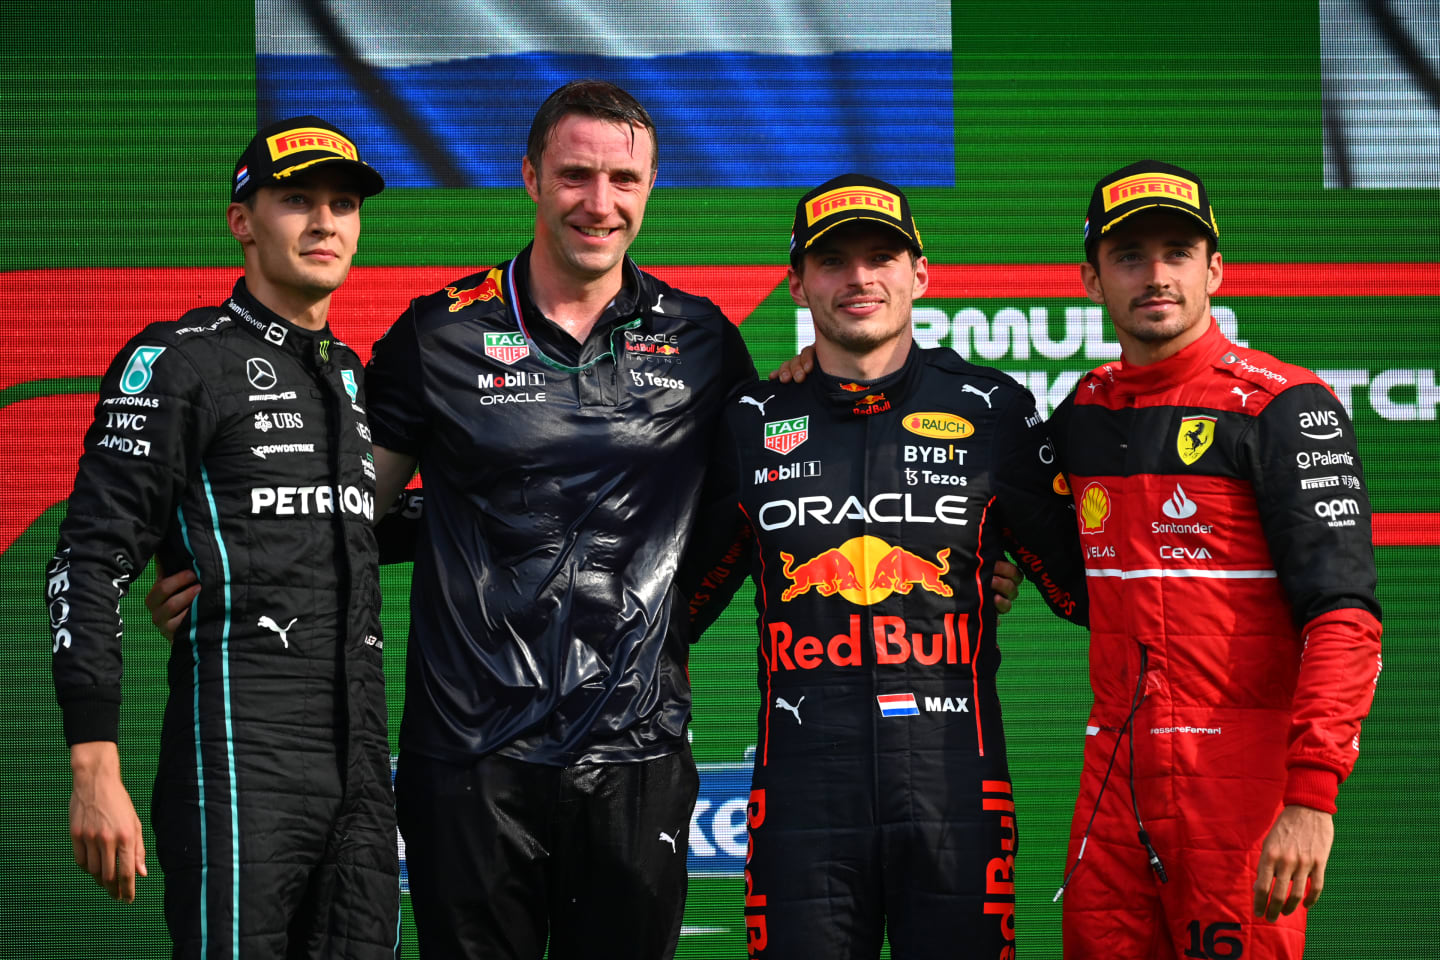 ZANDVOORT, NETHERLANDS - SEPTEMBER 04: Race winner Max Verstappen of the Netherlands and Oracle Red Bull Racing, second placed George Russell of Great Britain and Mercedes and third placed Charles Leclerc of Monaco and Ferrari celebrate on the podium during the F1 Grand Prix of The Netherlands at Circuit Zandvoort on September 04, 2022 in Zandvoort, Netherlands. (Photo by Dan Mullan/Getty Images)